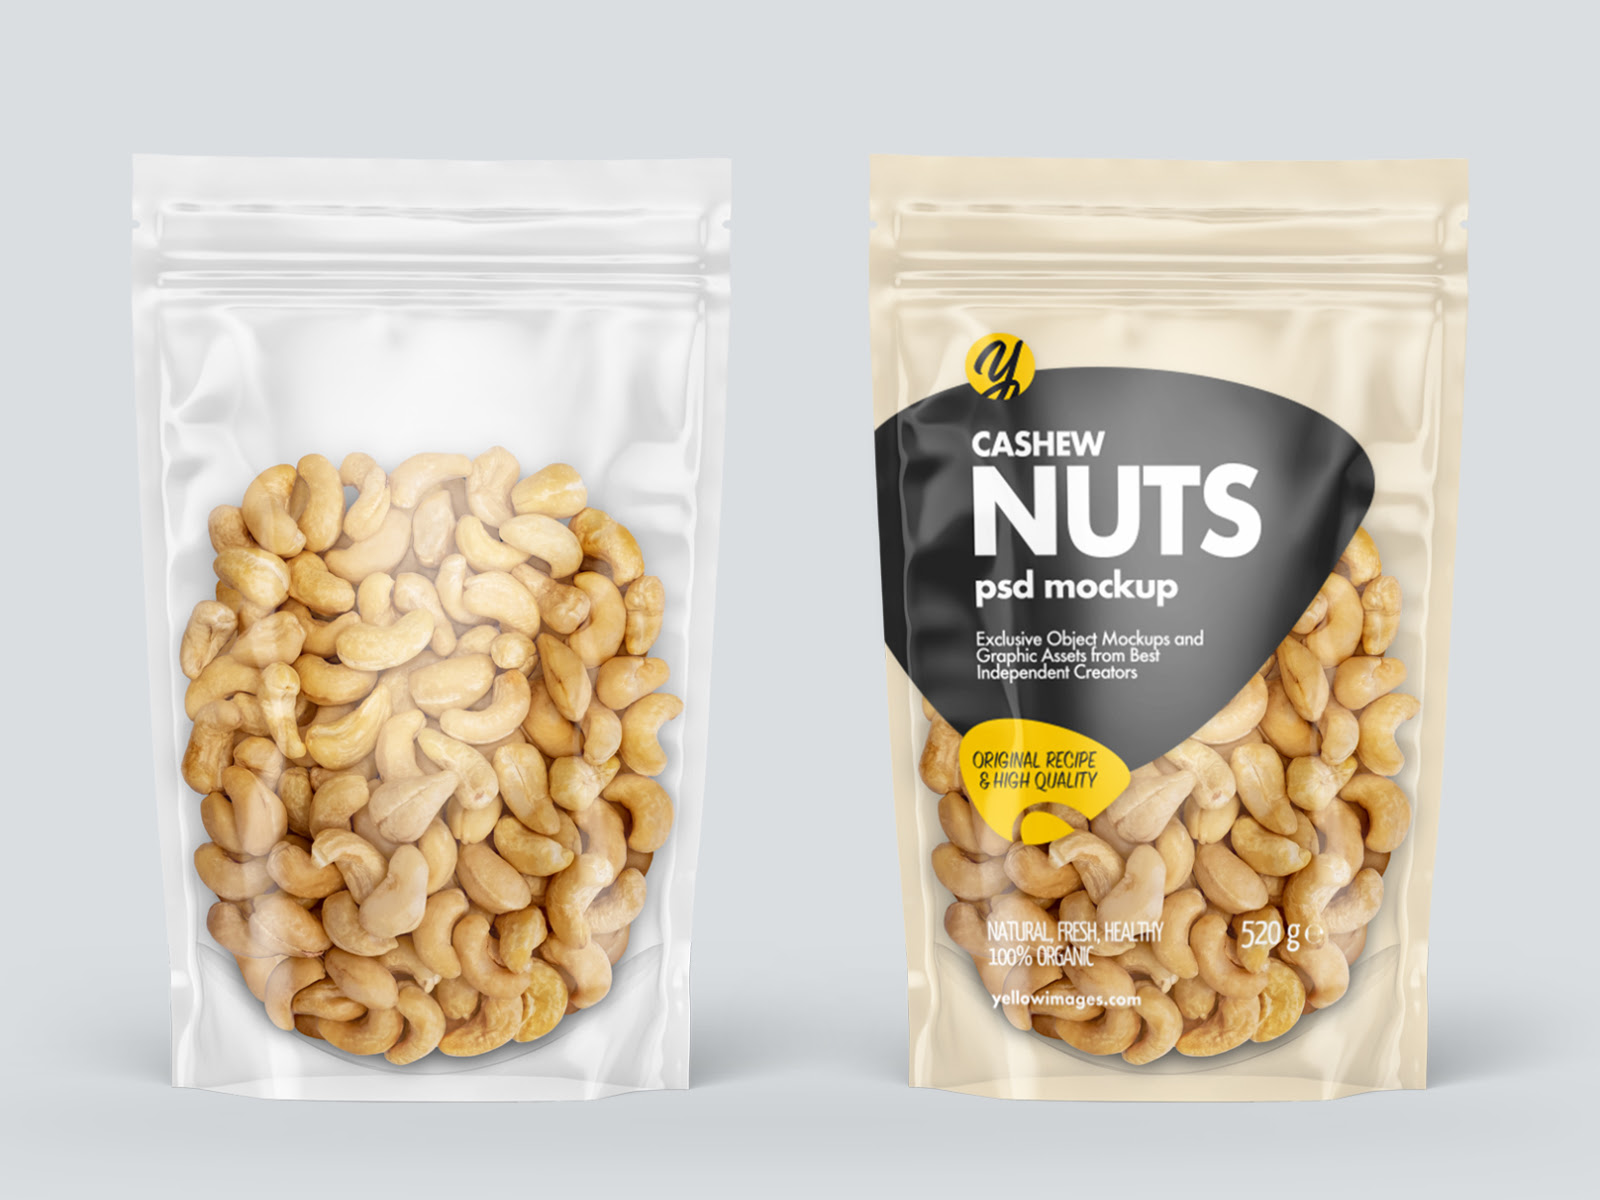 Clear Plastic Pouch w/ Cashew Nuts Mockup by Andrey Gapon on Dribbble